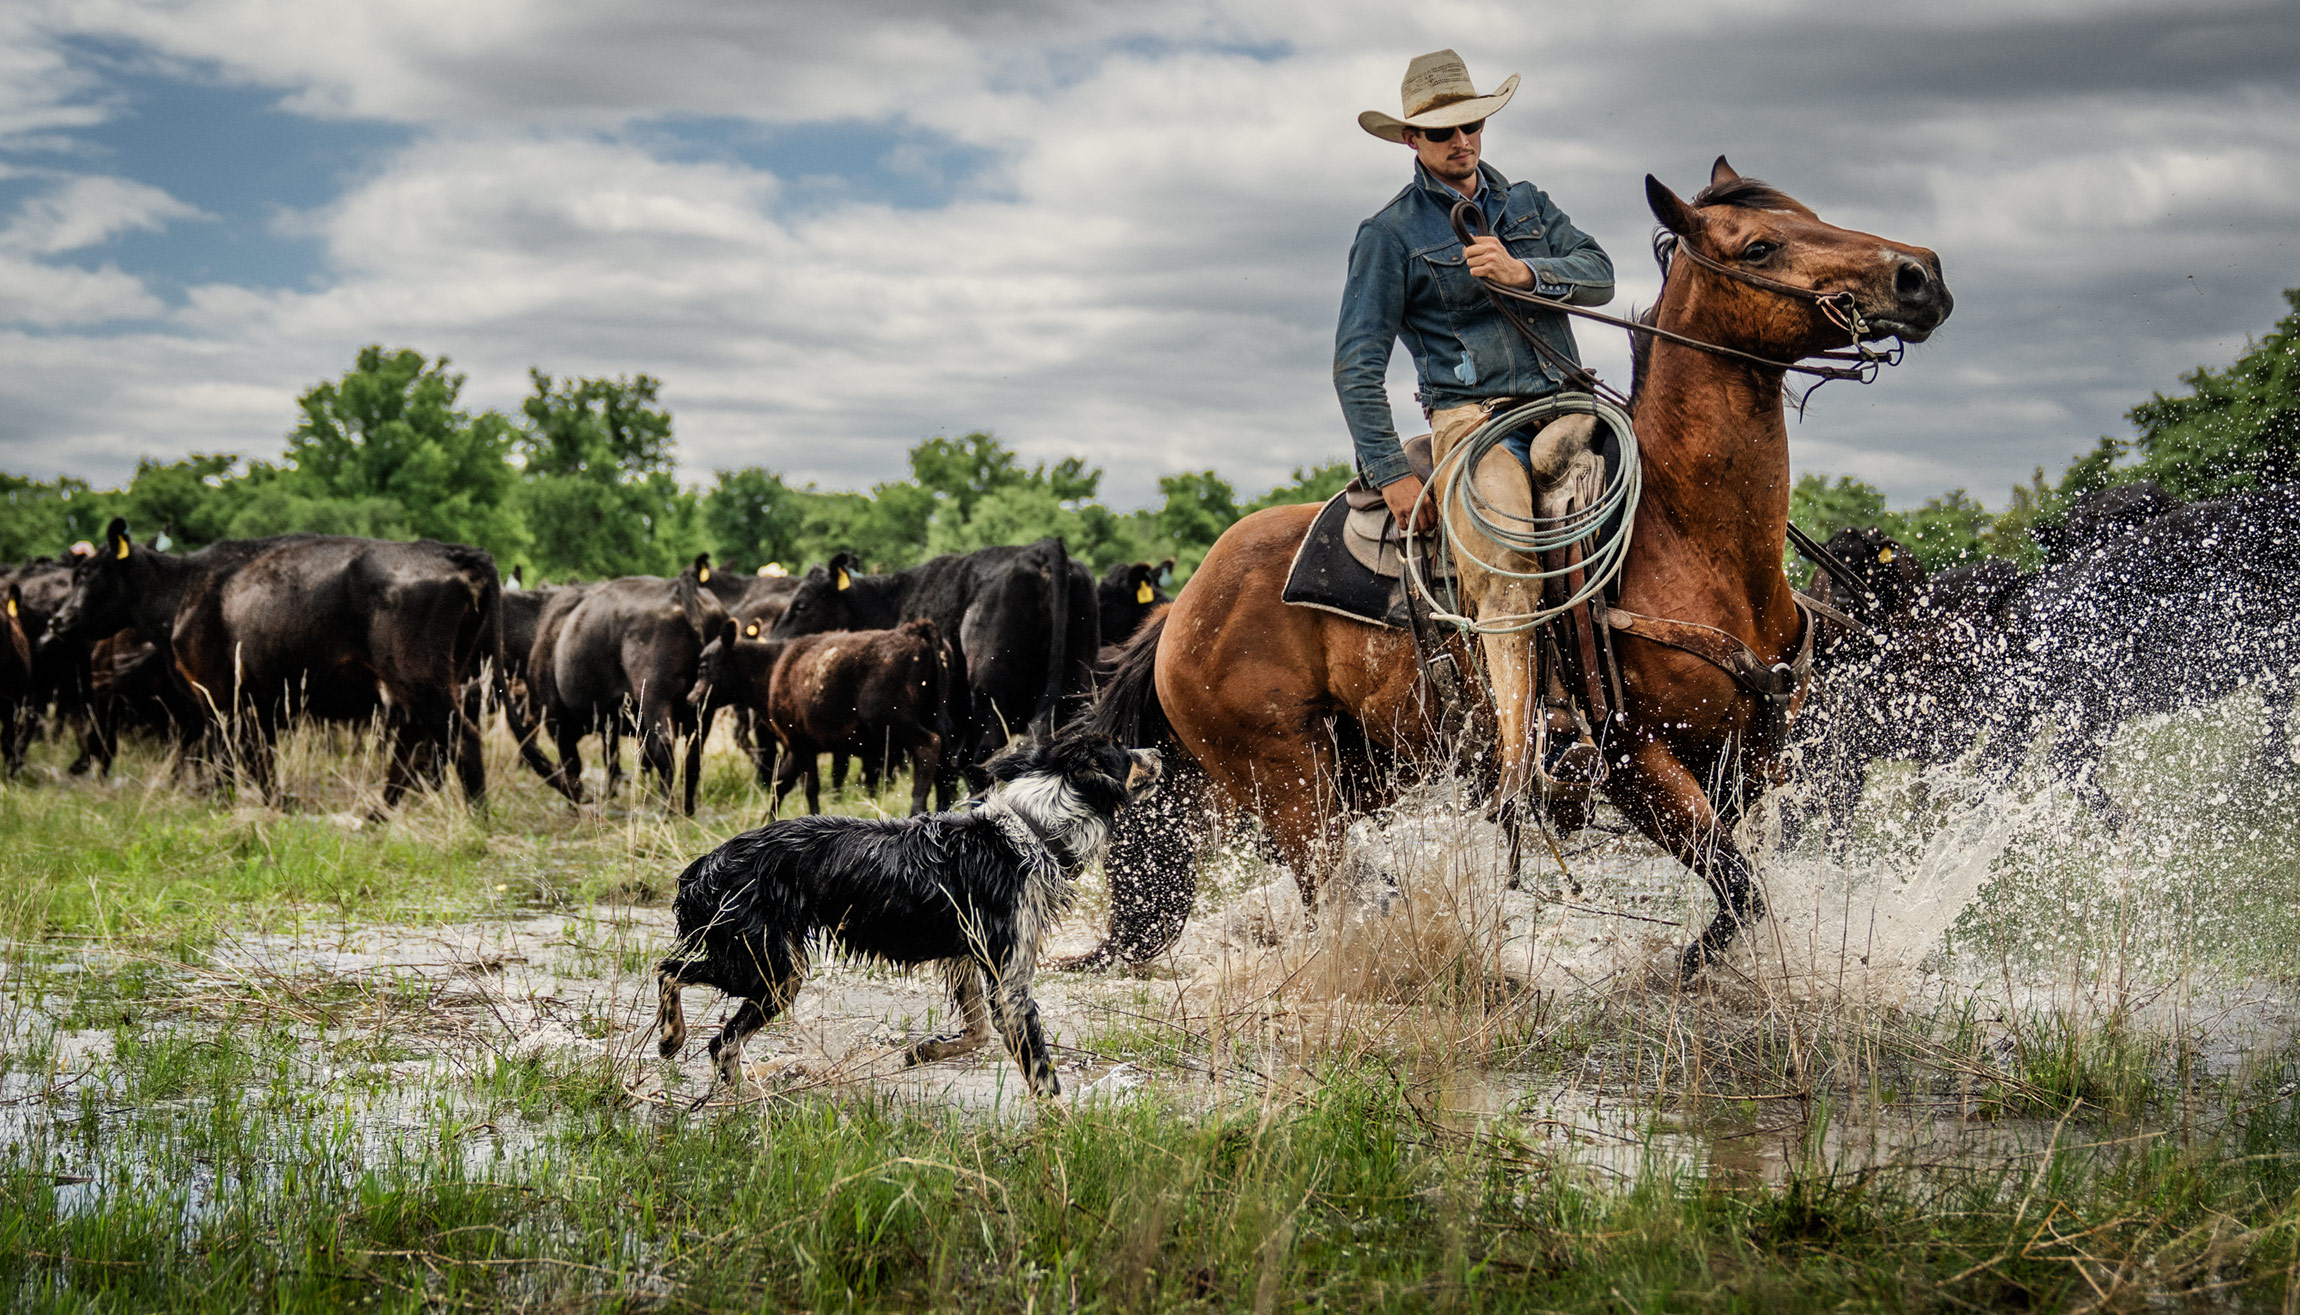 Cowboy with Cattle Herd and Dog